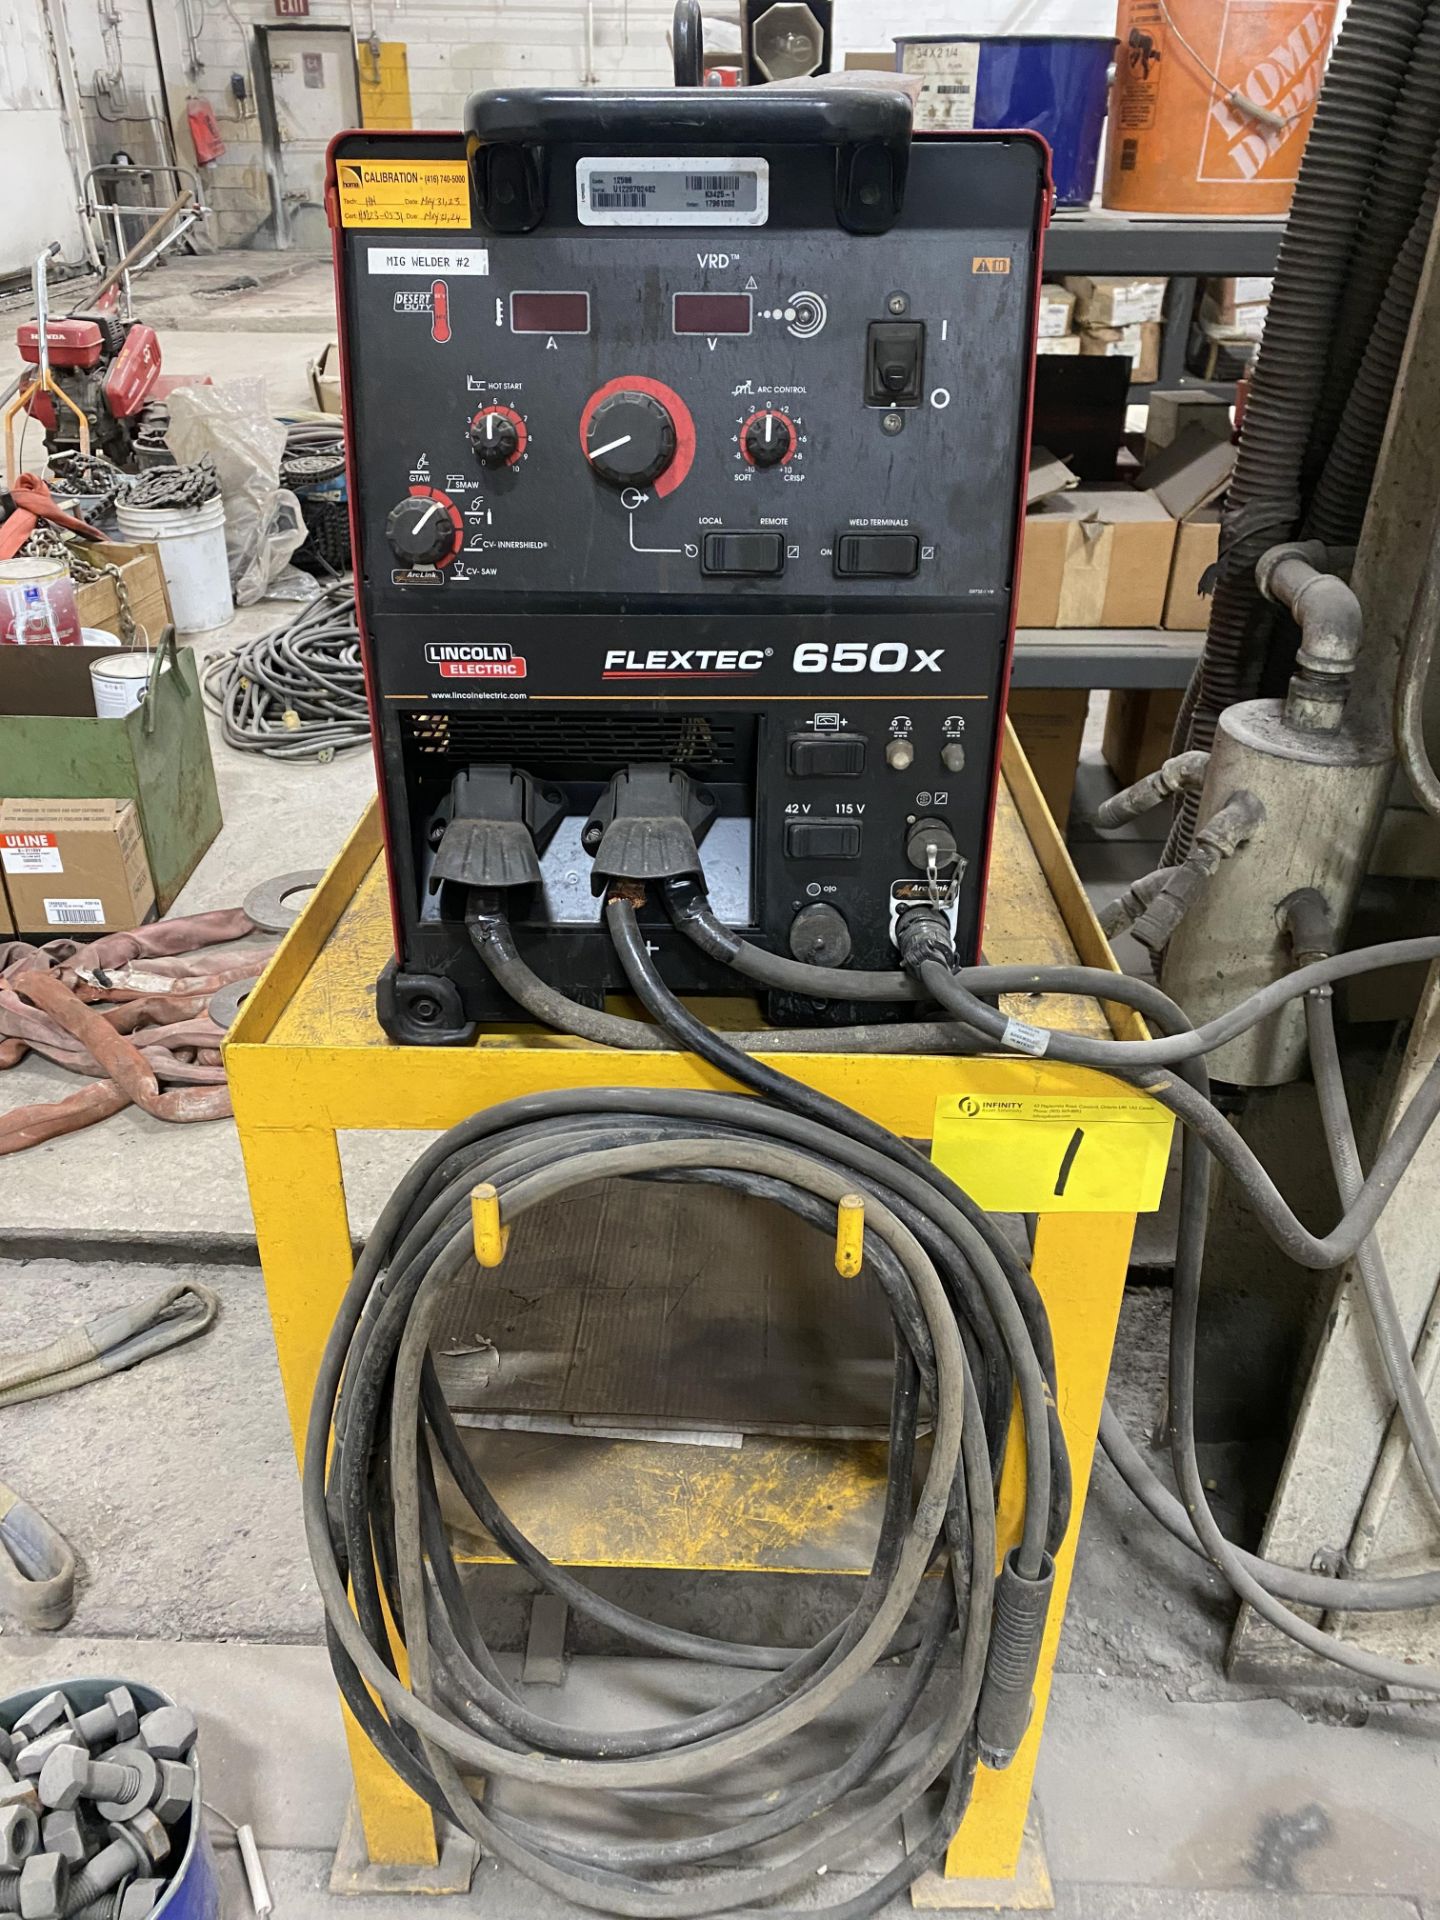 LINCOLN ELECTRIC FLEXTEC 650X MIG WELDER W/ LINCOLN ELECTRIC DLF-82 WIRE FEEDER, CABLES, STAND - Image 2 of 5